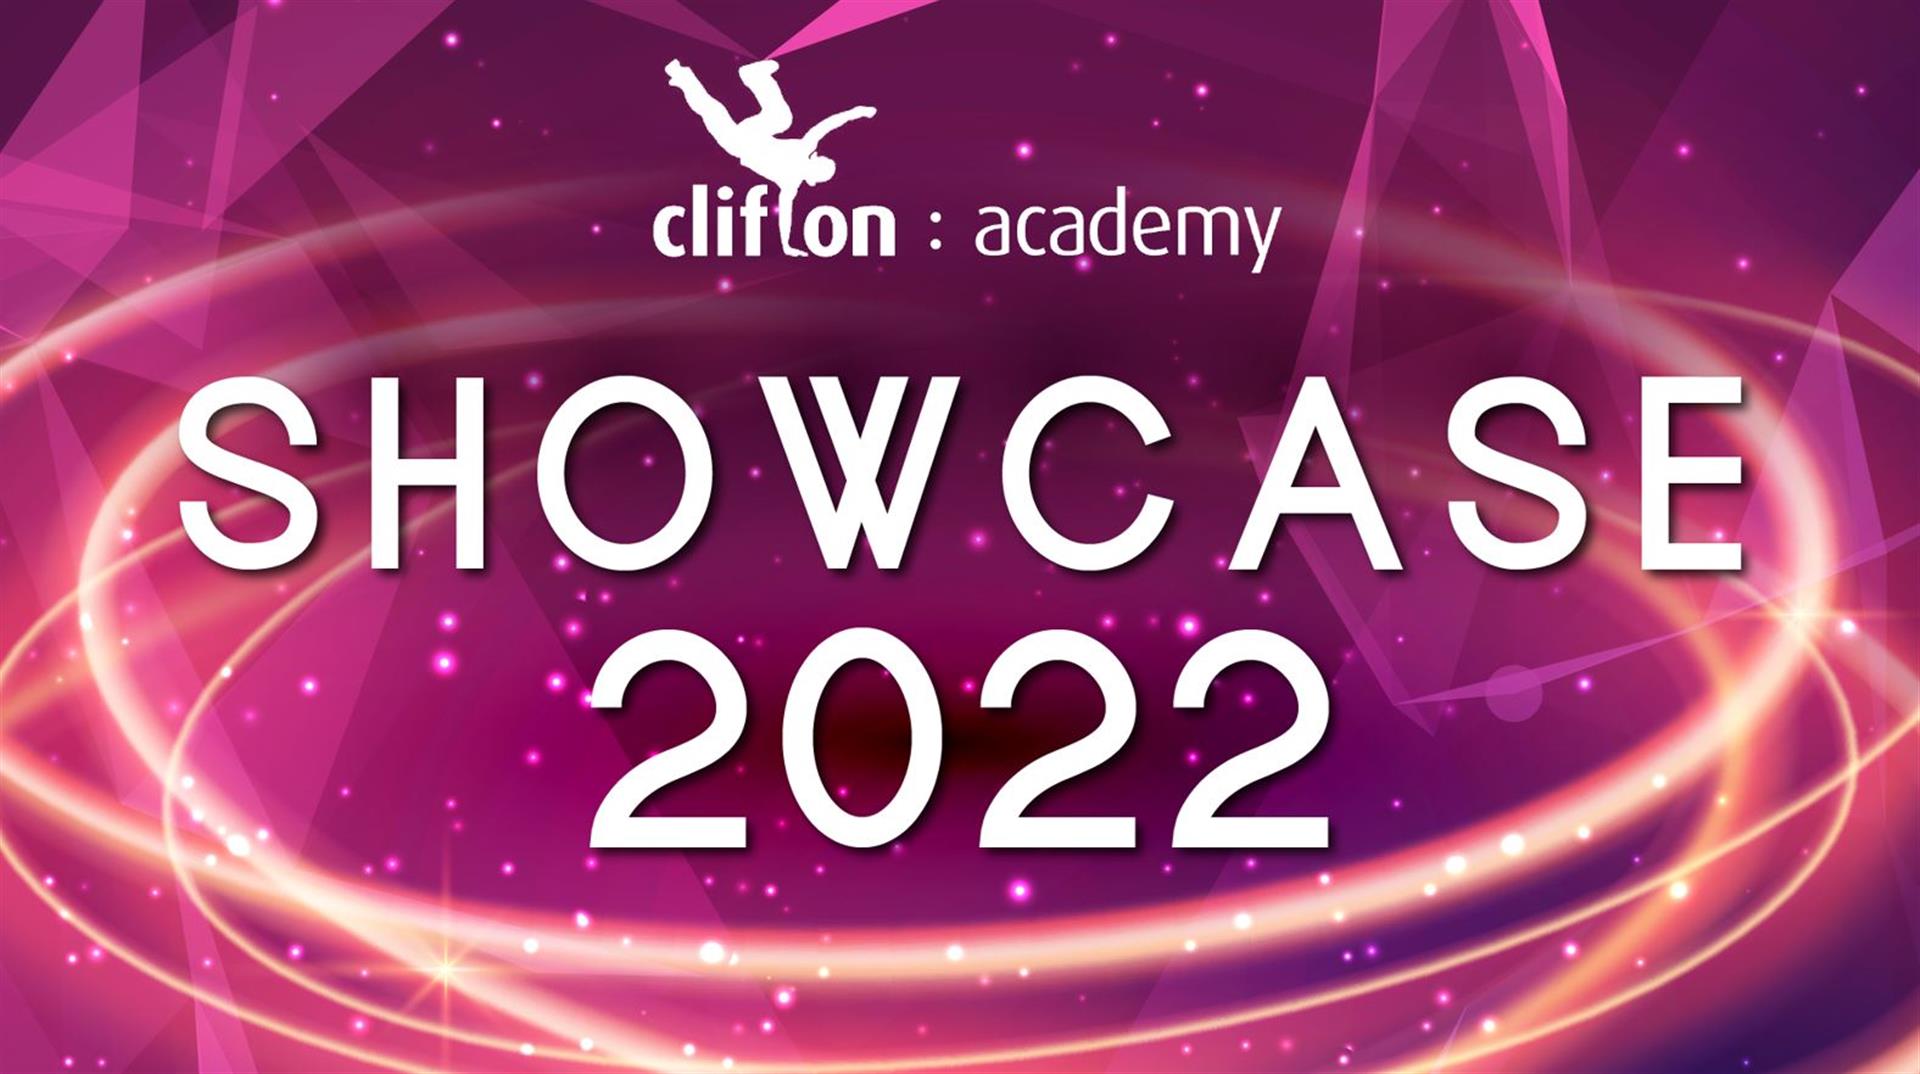 Clifton Academy Showcase 2022 - Lowther Pavilion